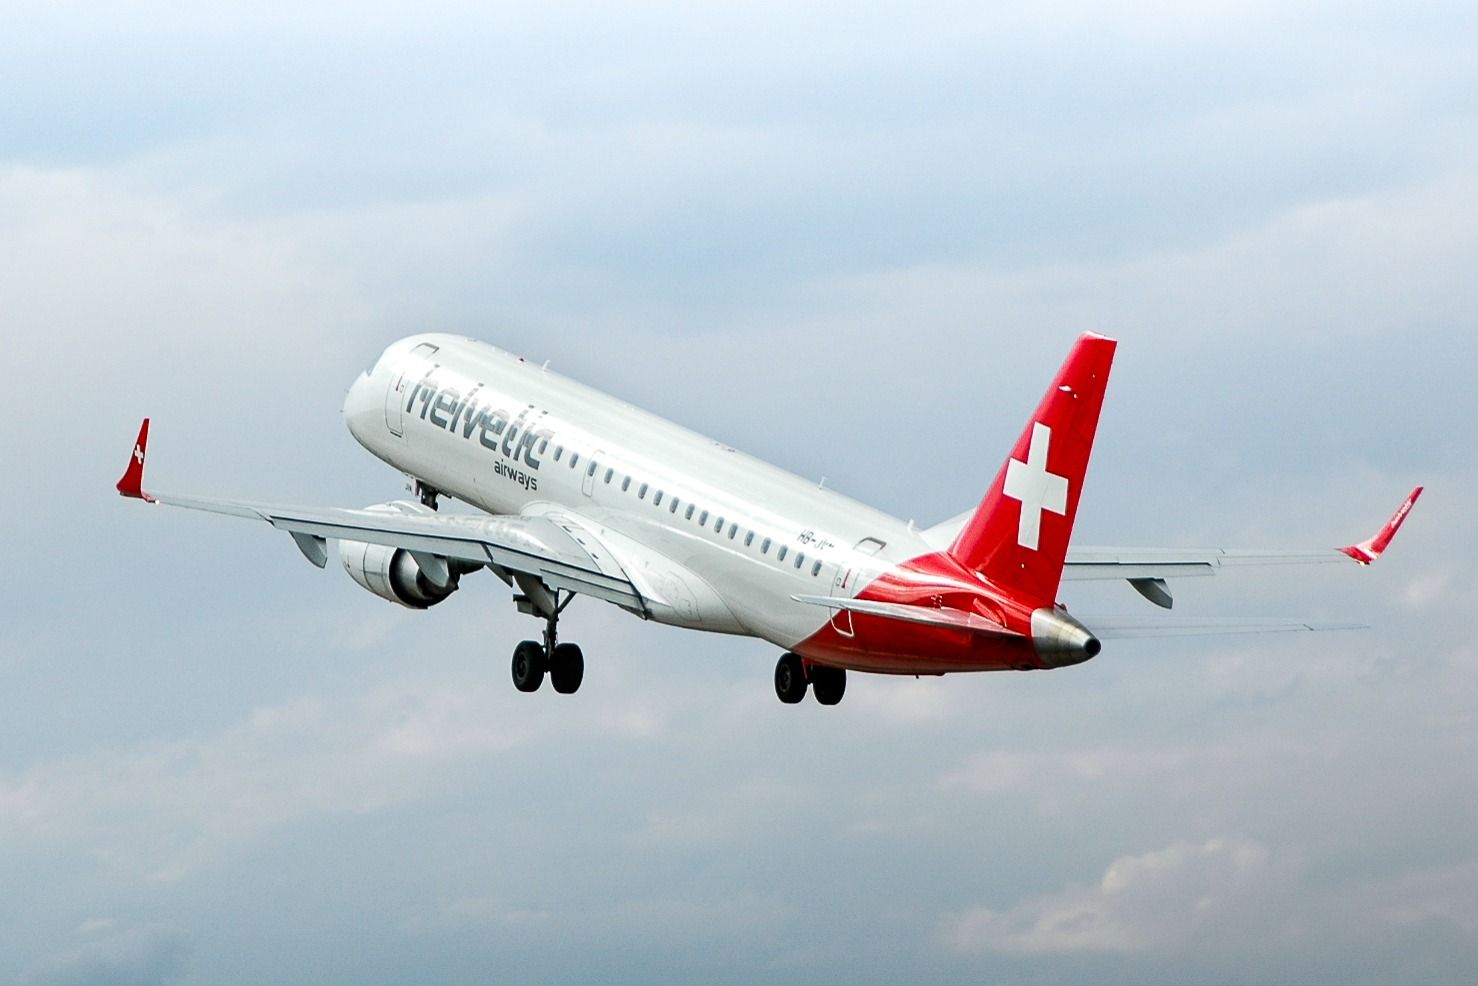 Helvetic Airways Embraer E190 taking off. 